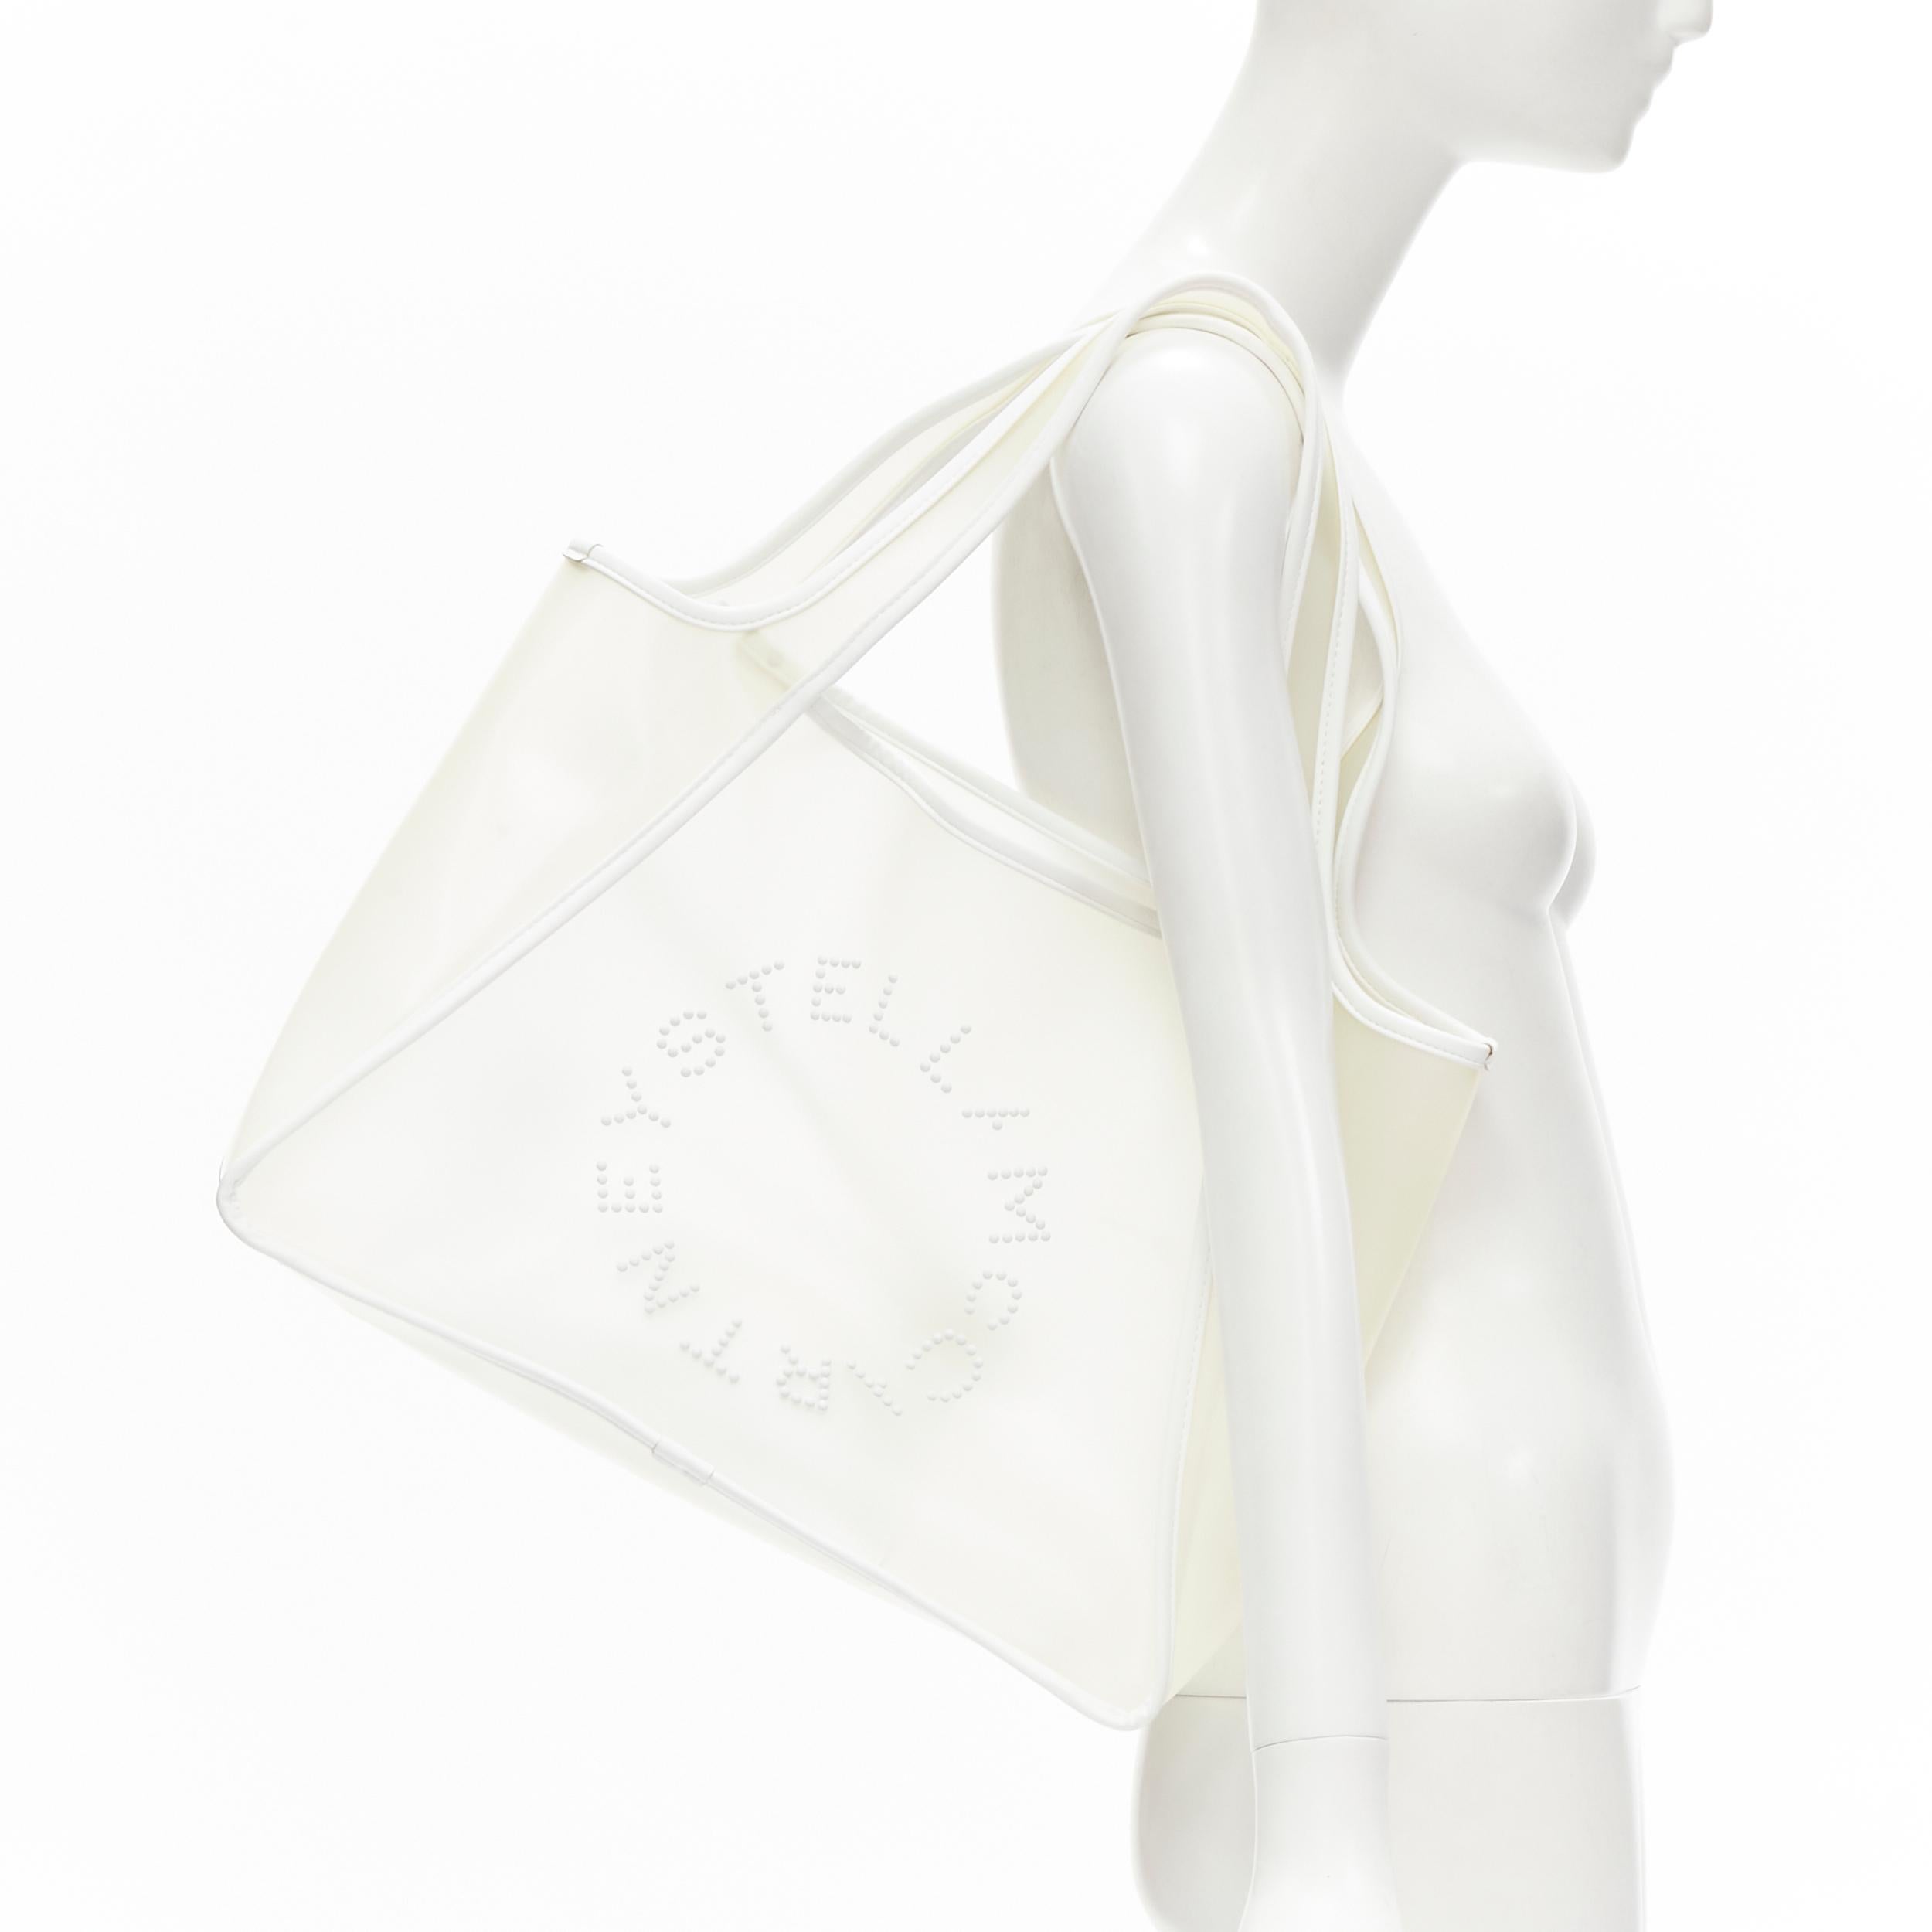 STELLA MCCARTNEY Signature Logo milk PVC white faux leather trim tote bag 
Reference: ANWU/A00005 
Brand: Stella McCartney 
Model: PVC tote 
Material: PVC 
Color: Clear 
Pattern: Solid 
Extra Detail: Comes with white faux leather envelope pouch at